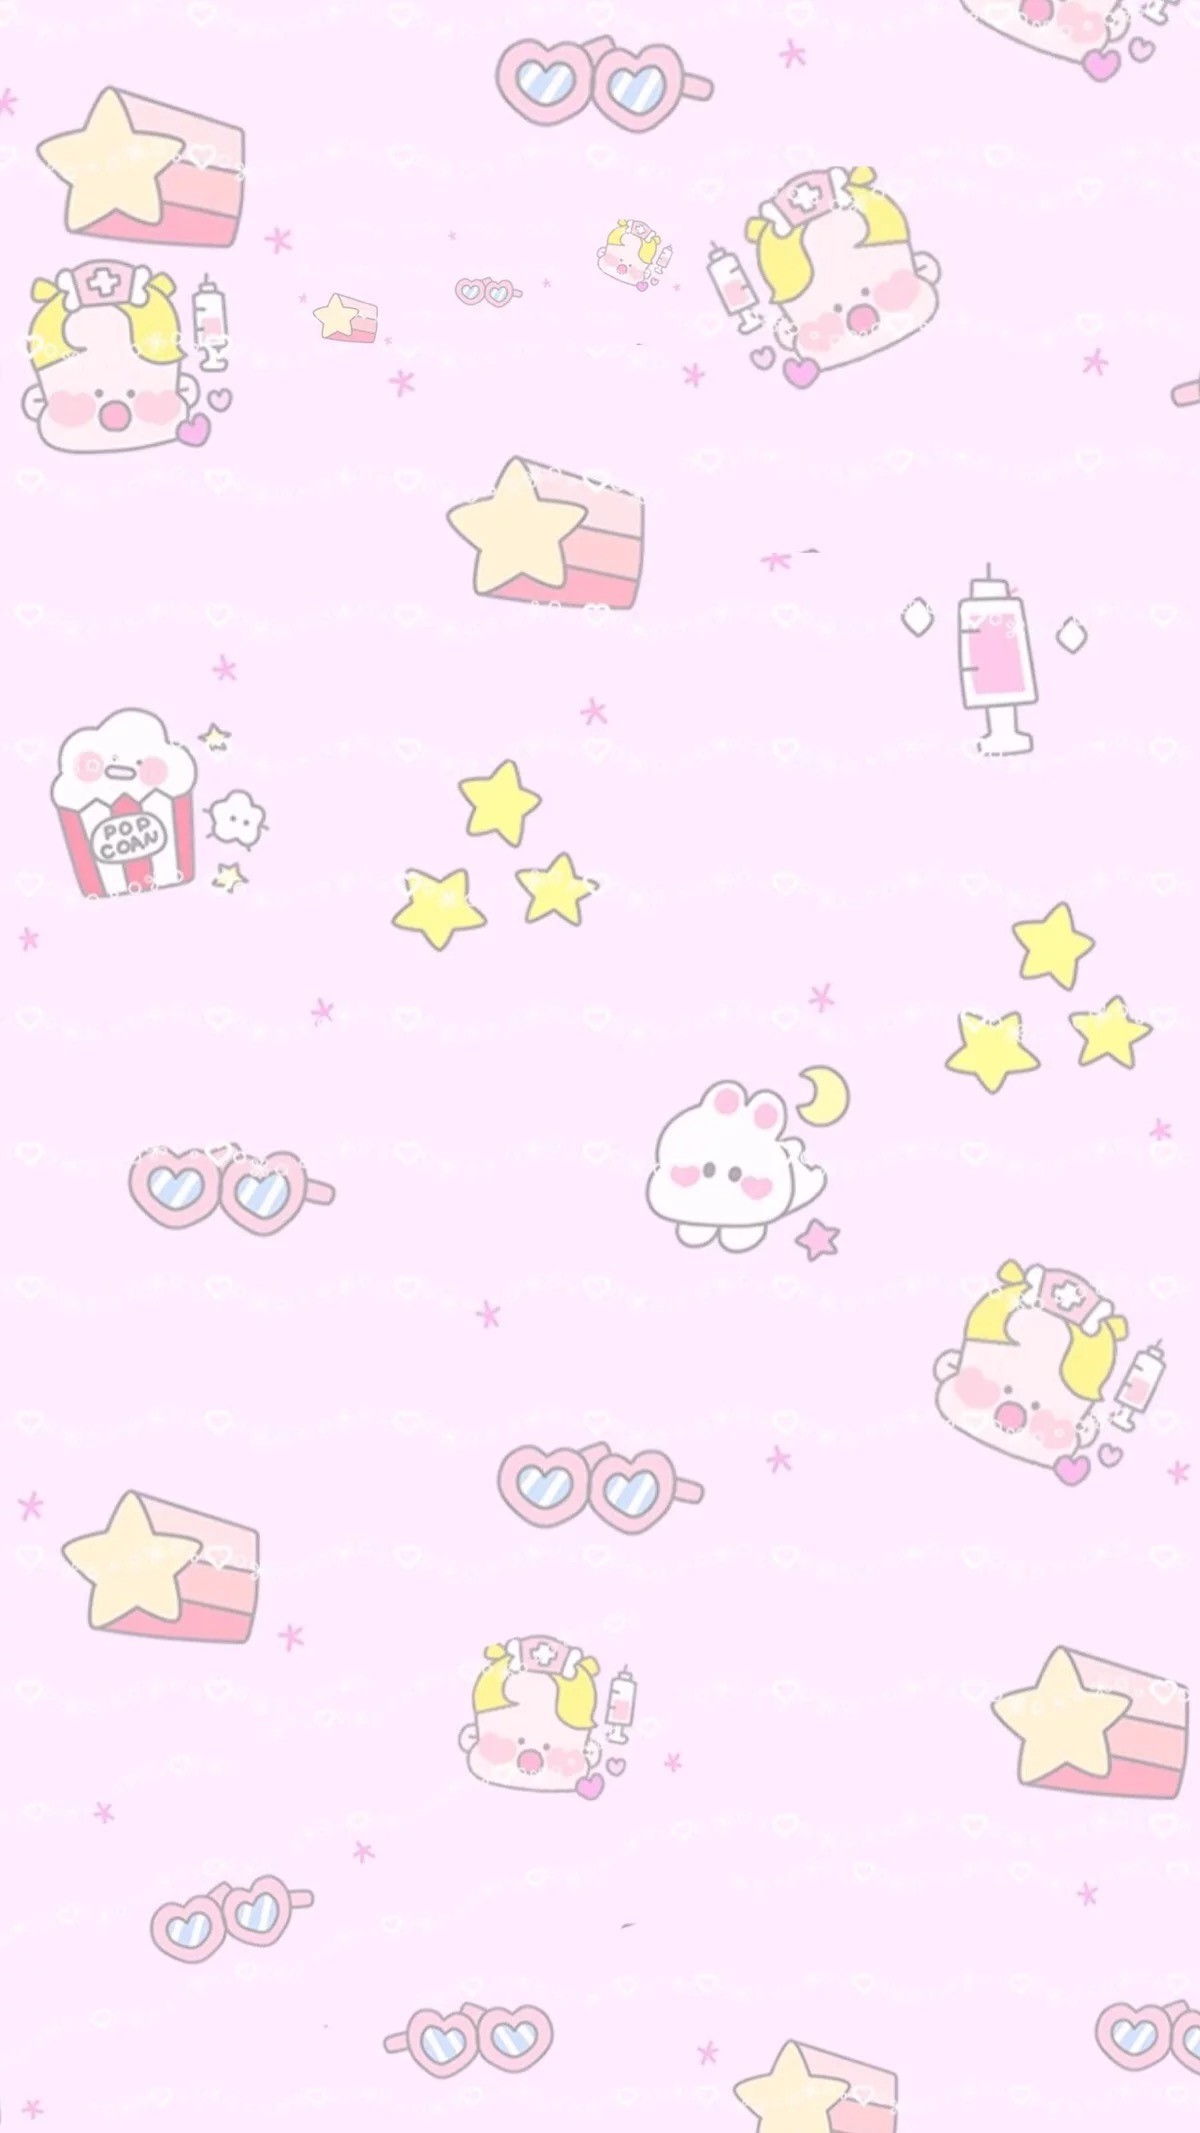 1200x2133 Cute Cartoon, Iphone Wallpapers, Kawaii, Paper Crafting, Iphone 5s,  Journals, Drawings, Screen, Funds